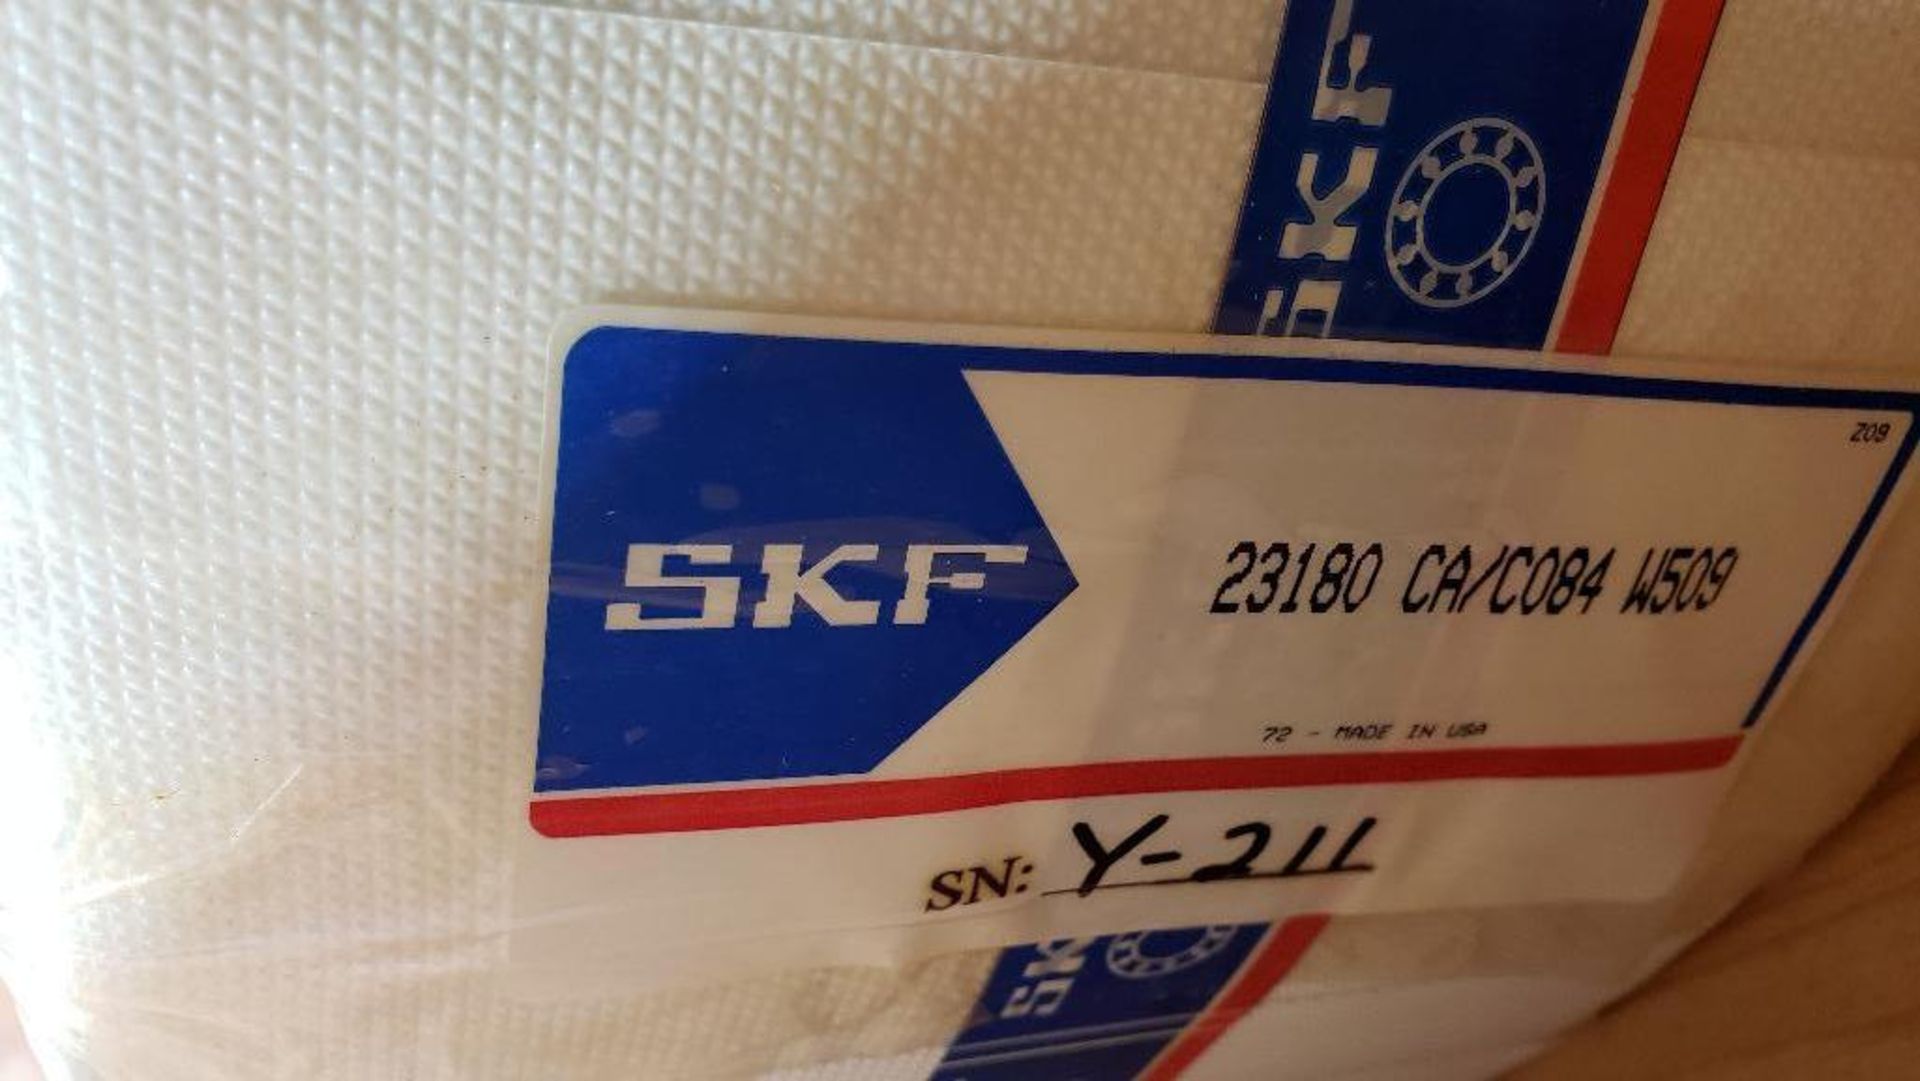 SKF super precision large capacity bearing. Part number 23180 CA/C084-W509. New in crate. - Image 6 of 6